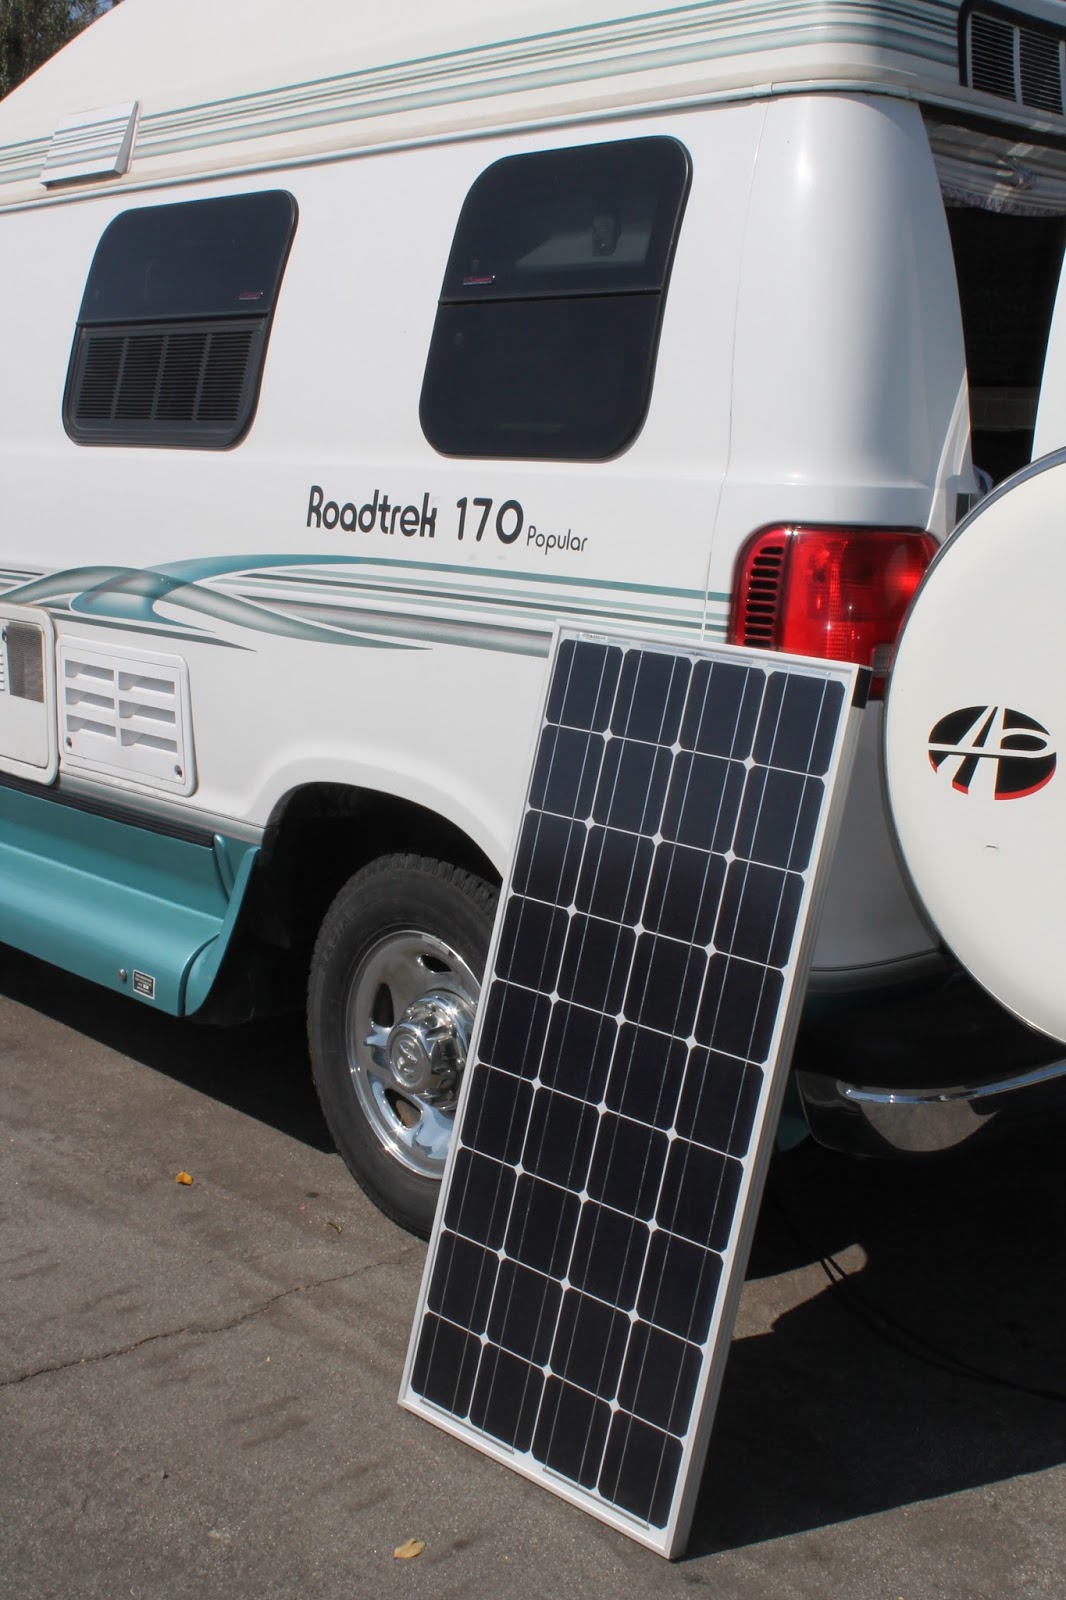 The Pathless Traveler Project Install a solar panel to my RV (Roadtrek 170 Popular) for around